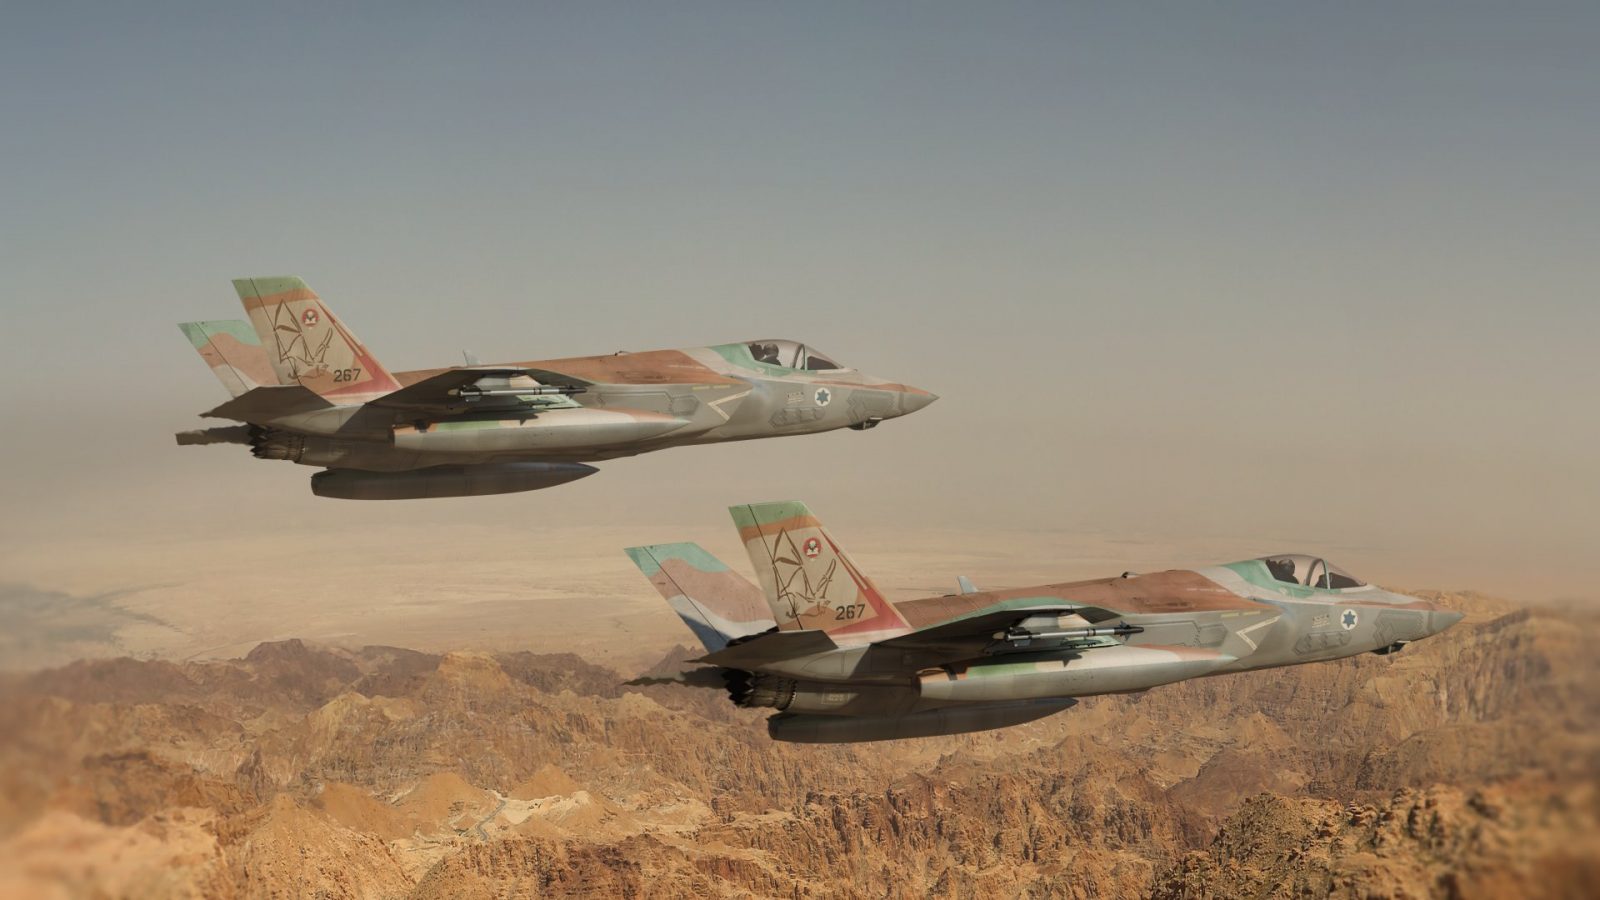 israeli-air-force-f-35i-carried-out-airstrike-on-irgc-quds-force-convoy-in-syria